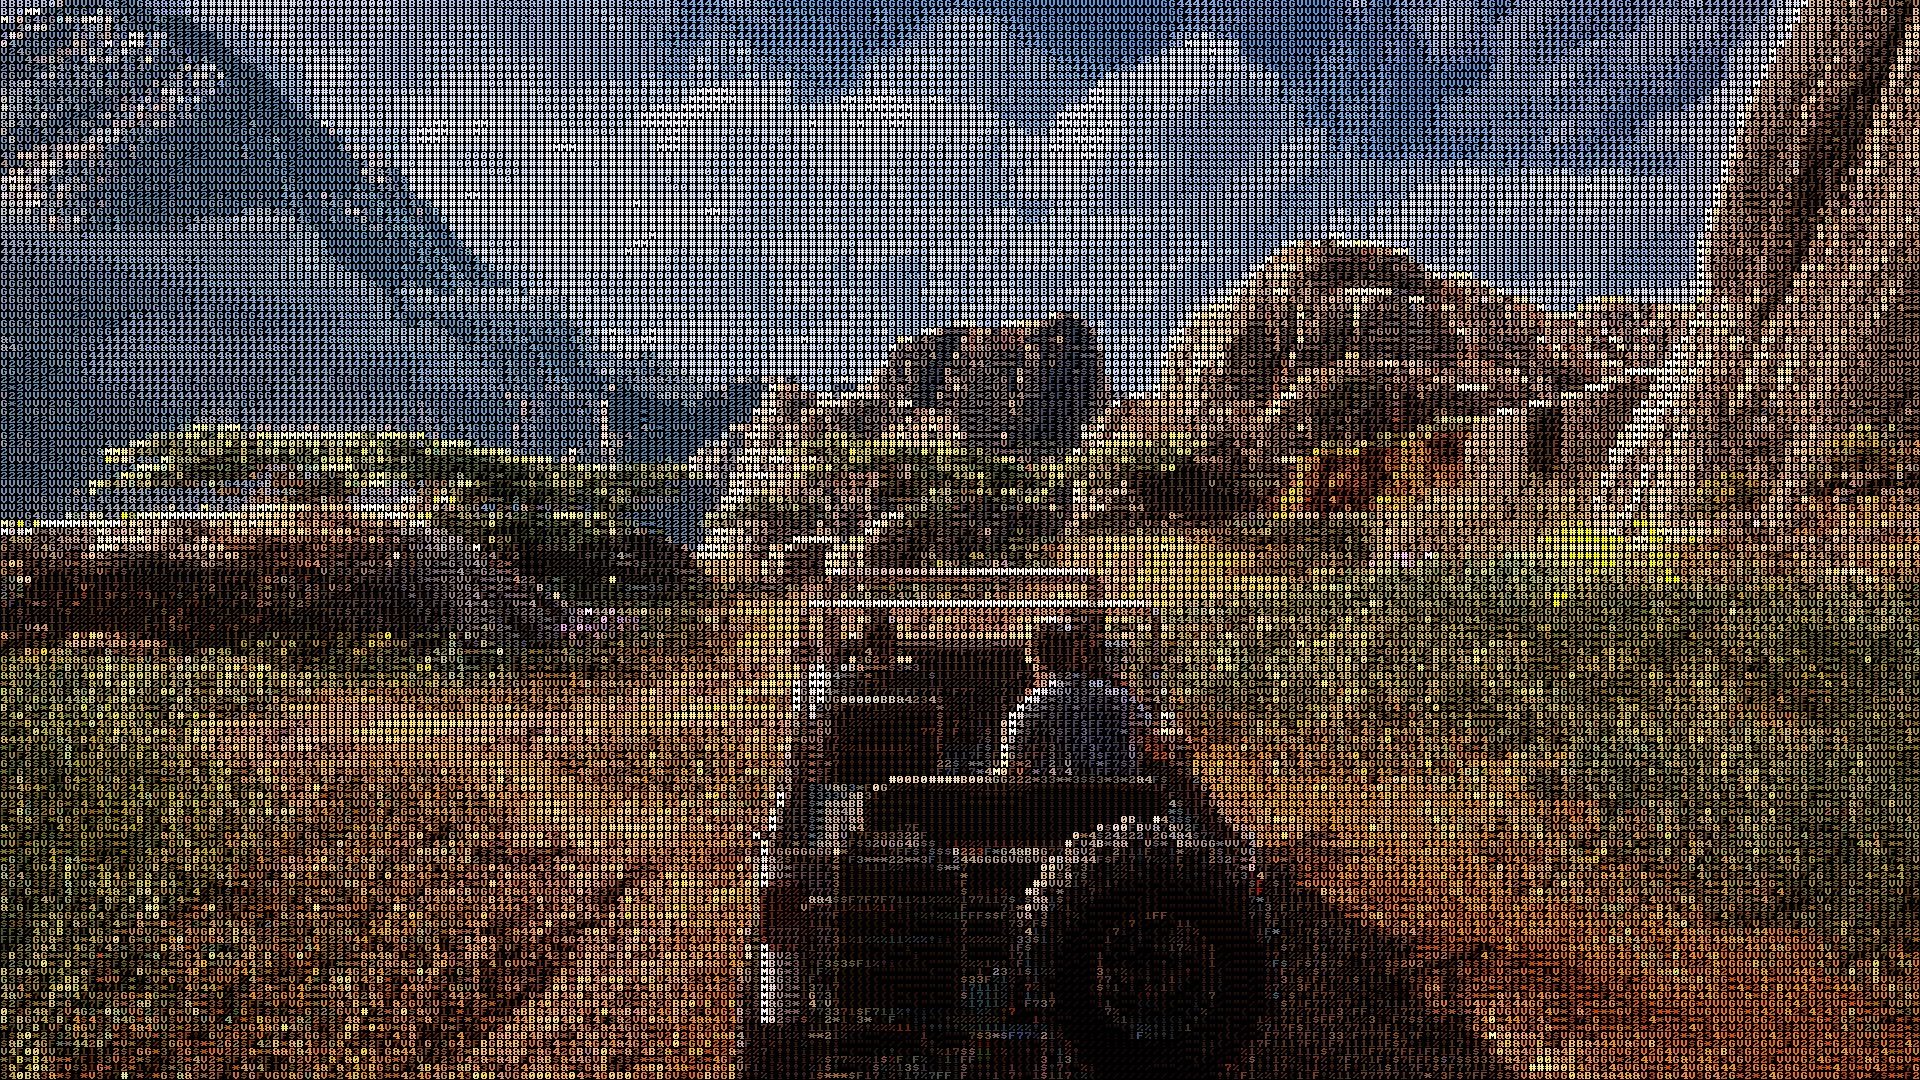 Uncharted 4 Visual Filter